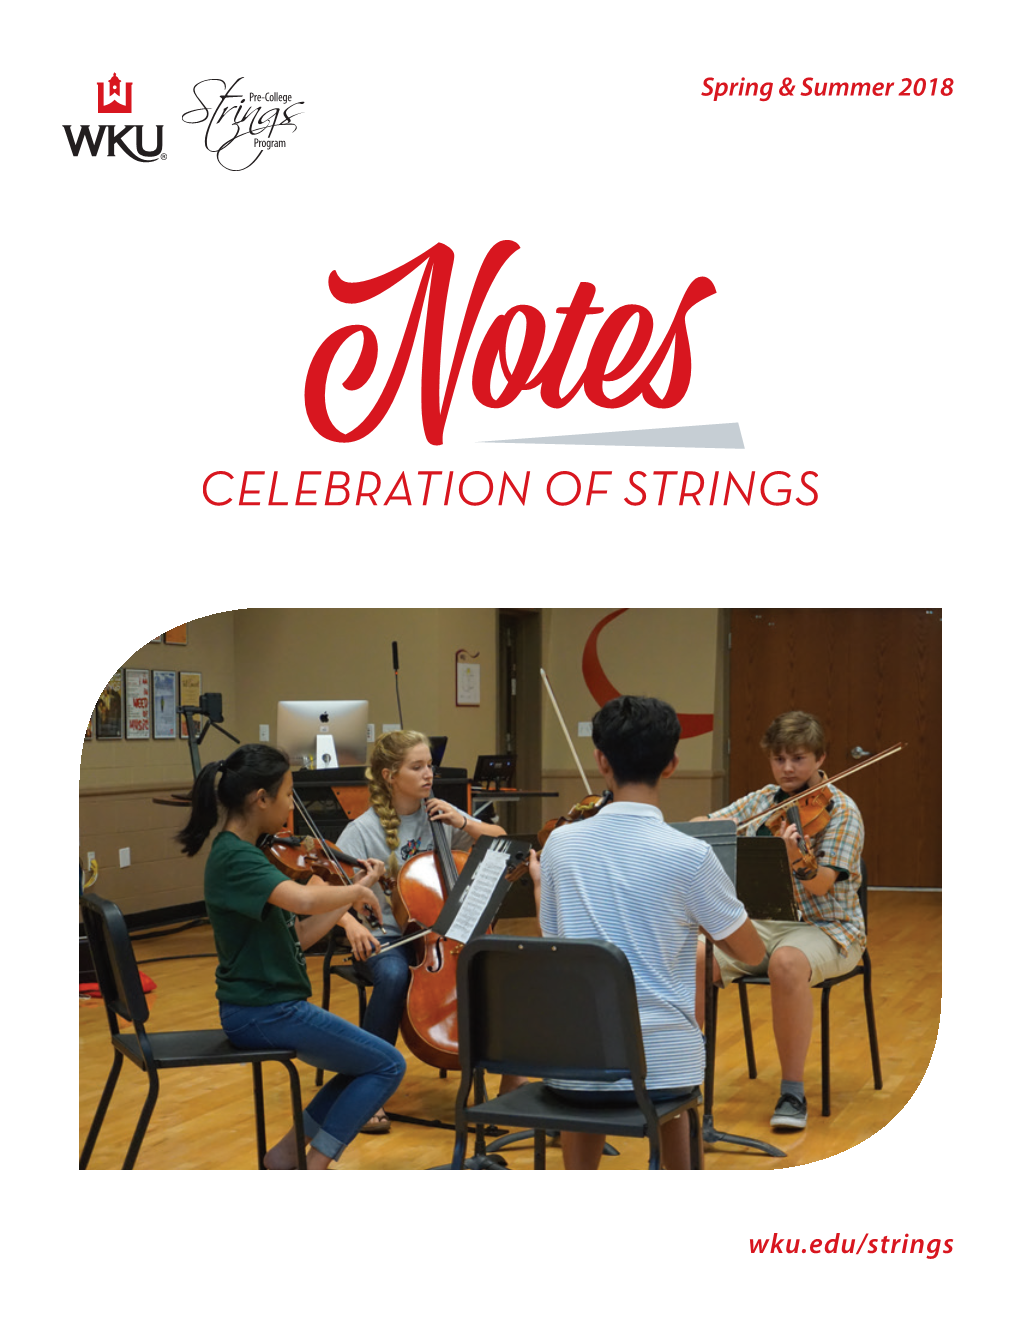 Wku.Edu/Strings Message from the Director